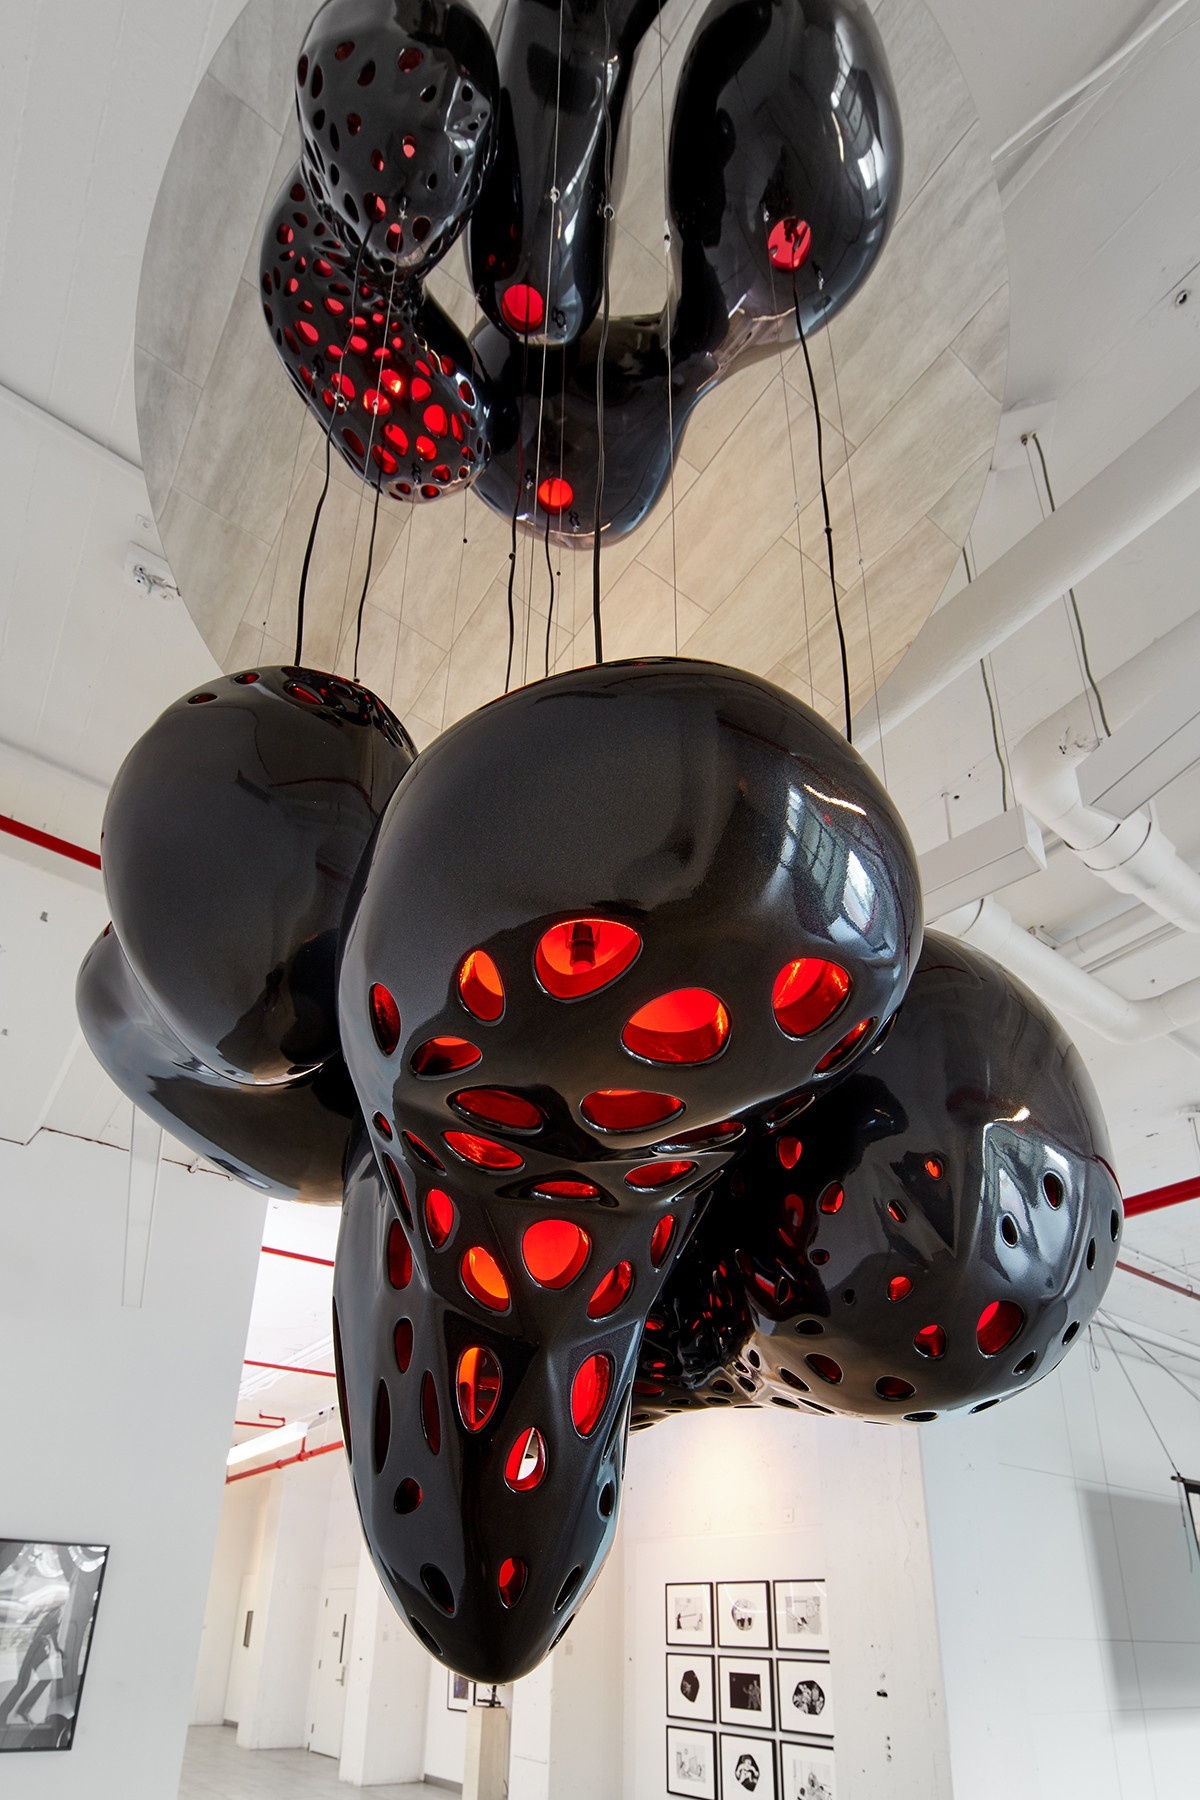 Installation in a white gallery space of two large, bulbous hanging forms connected by black wires/cables/ropes, red light shining through its perforations.